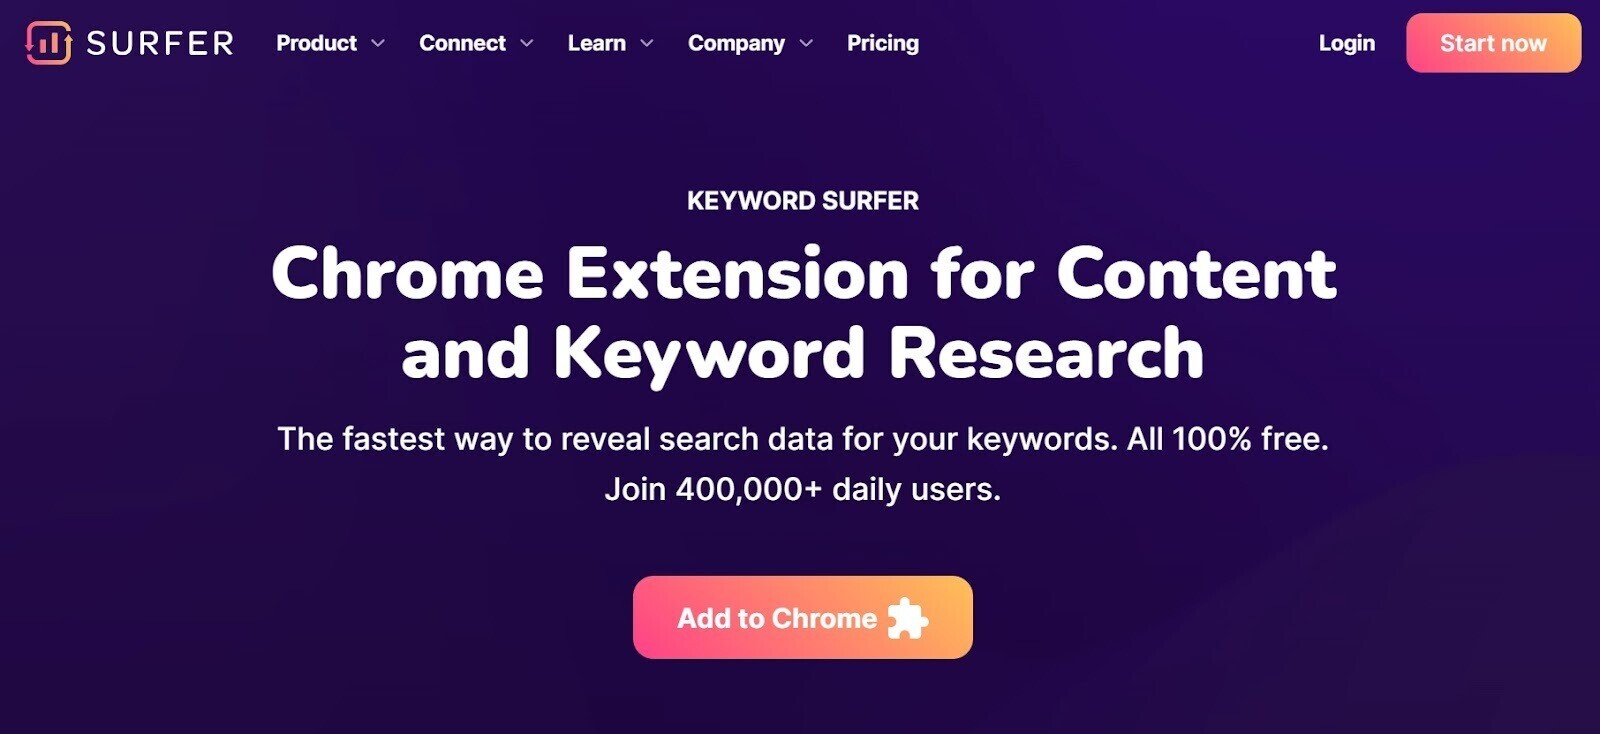 Keyword Surfer homepage with title "Chrome Extension for Content and Keyword Research" and "Add to Chrome" CTA